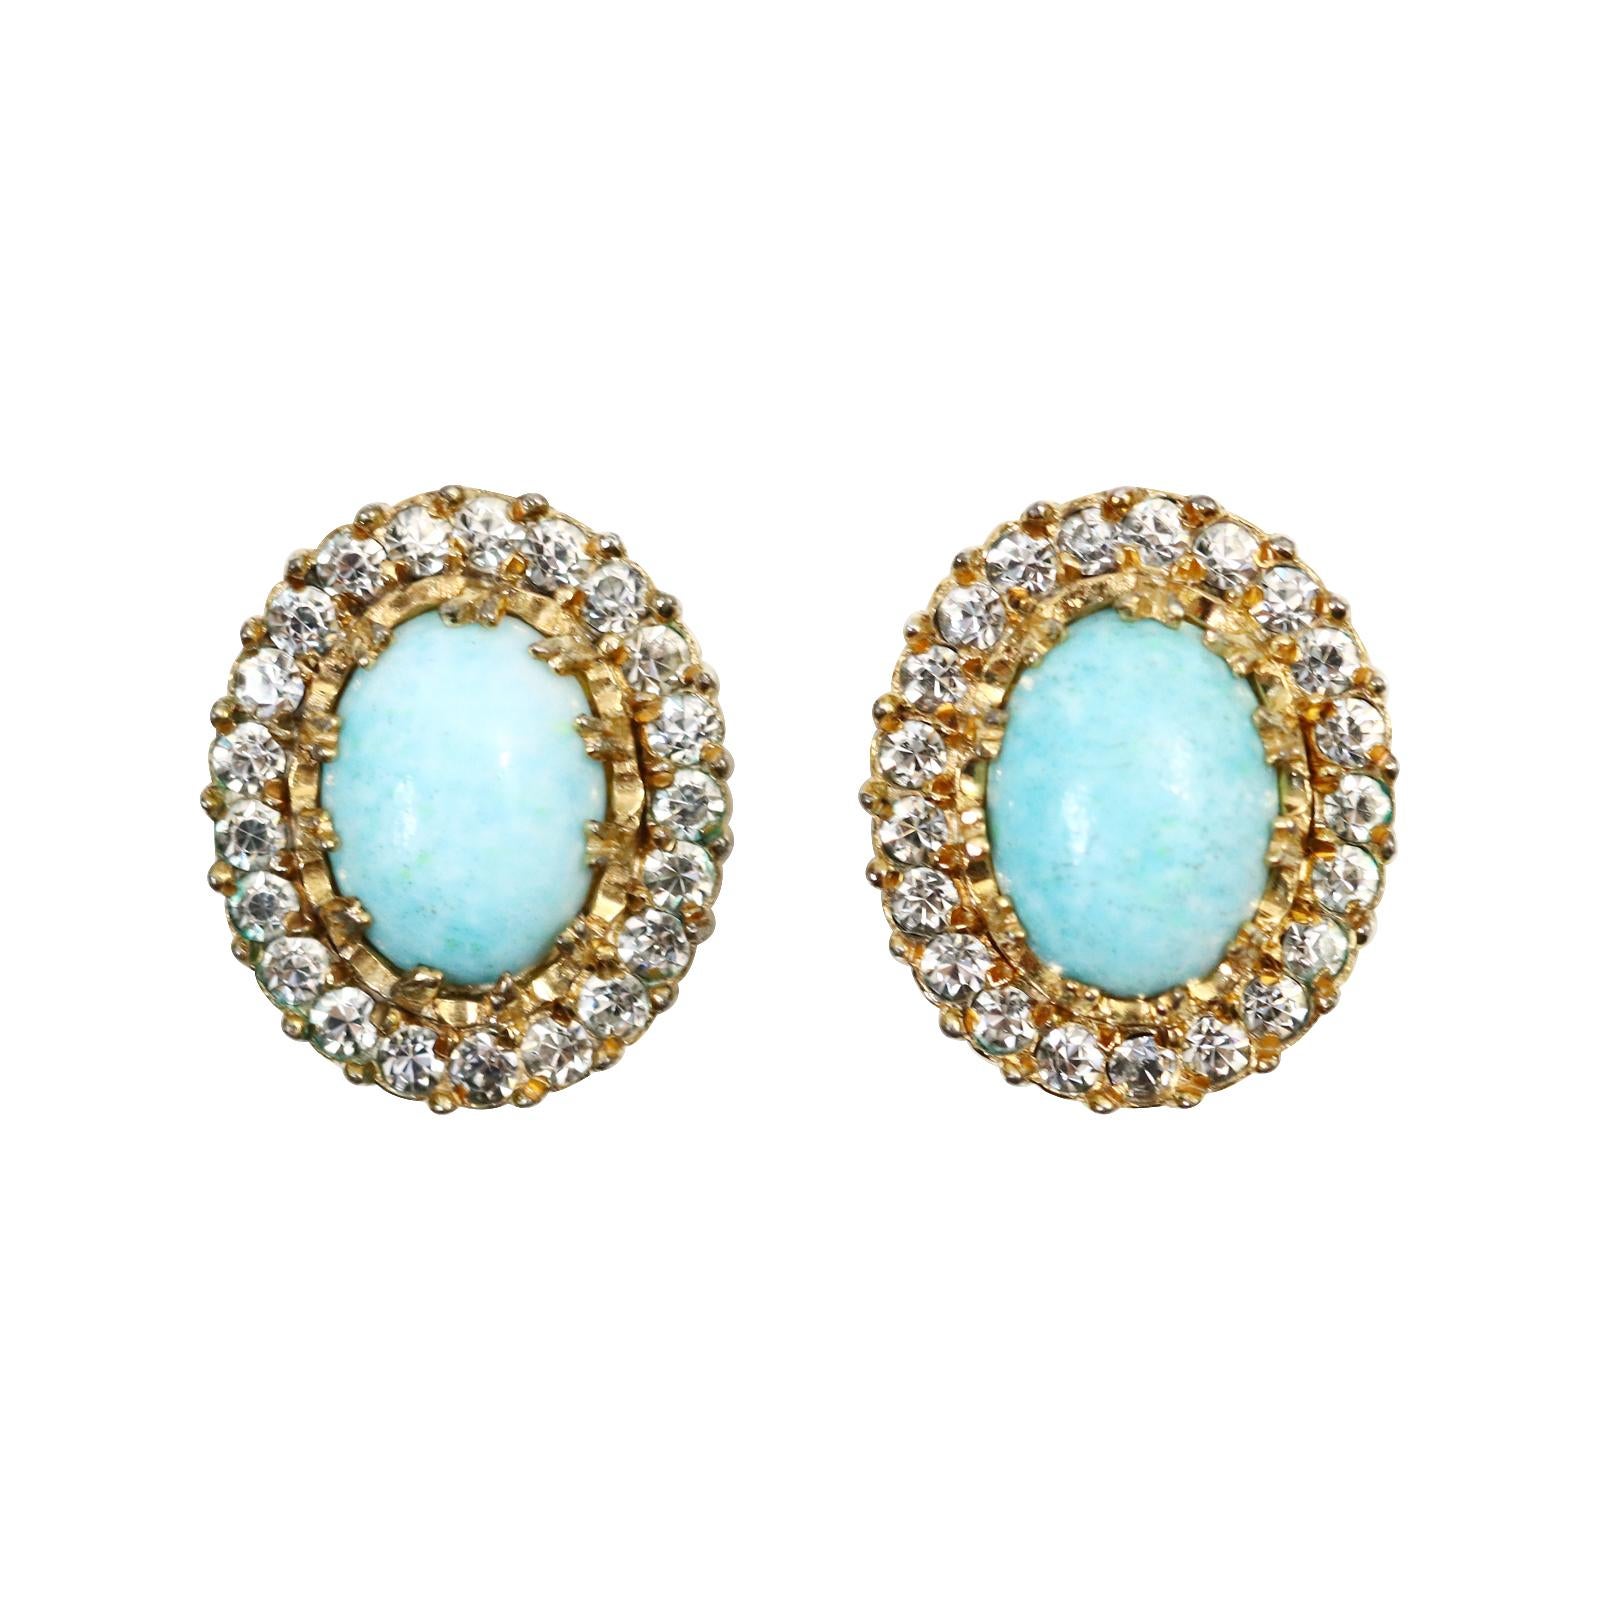 Vintage Nettie Rosenstein Faux Turquoise Diamante Earrings, circa 1960s In Good Condition For Sale In New York, NY